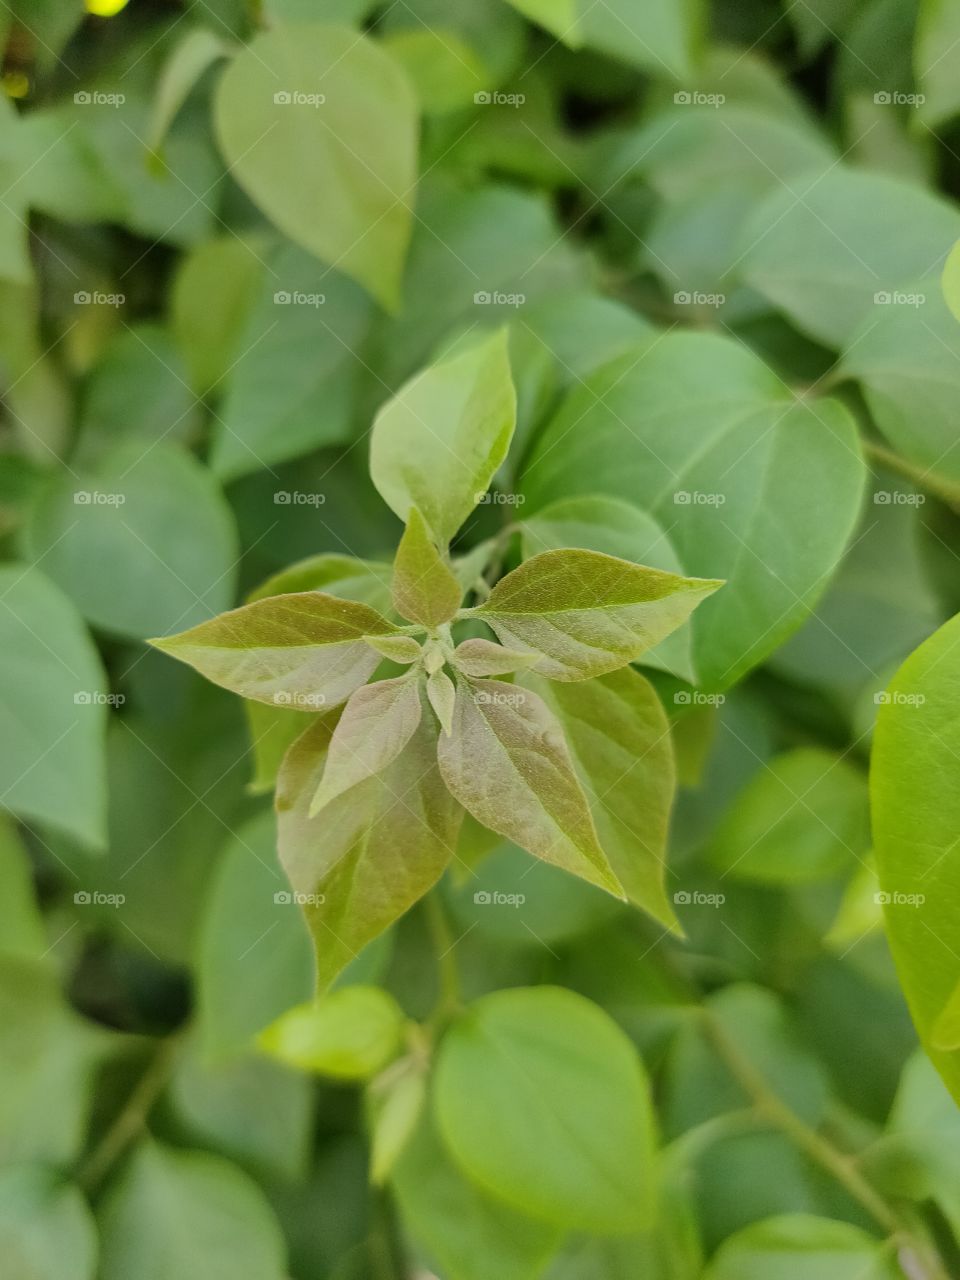 Green plant leaves and baby leaf